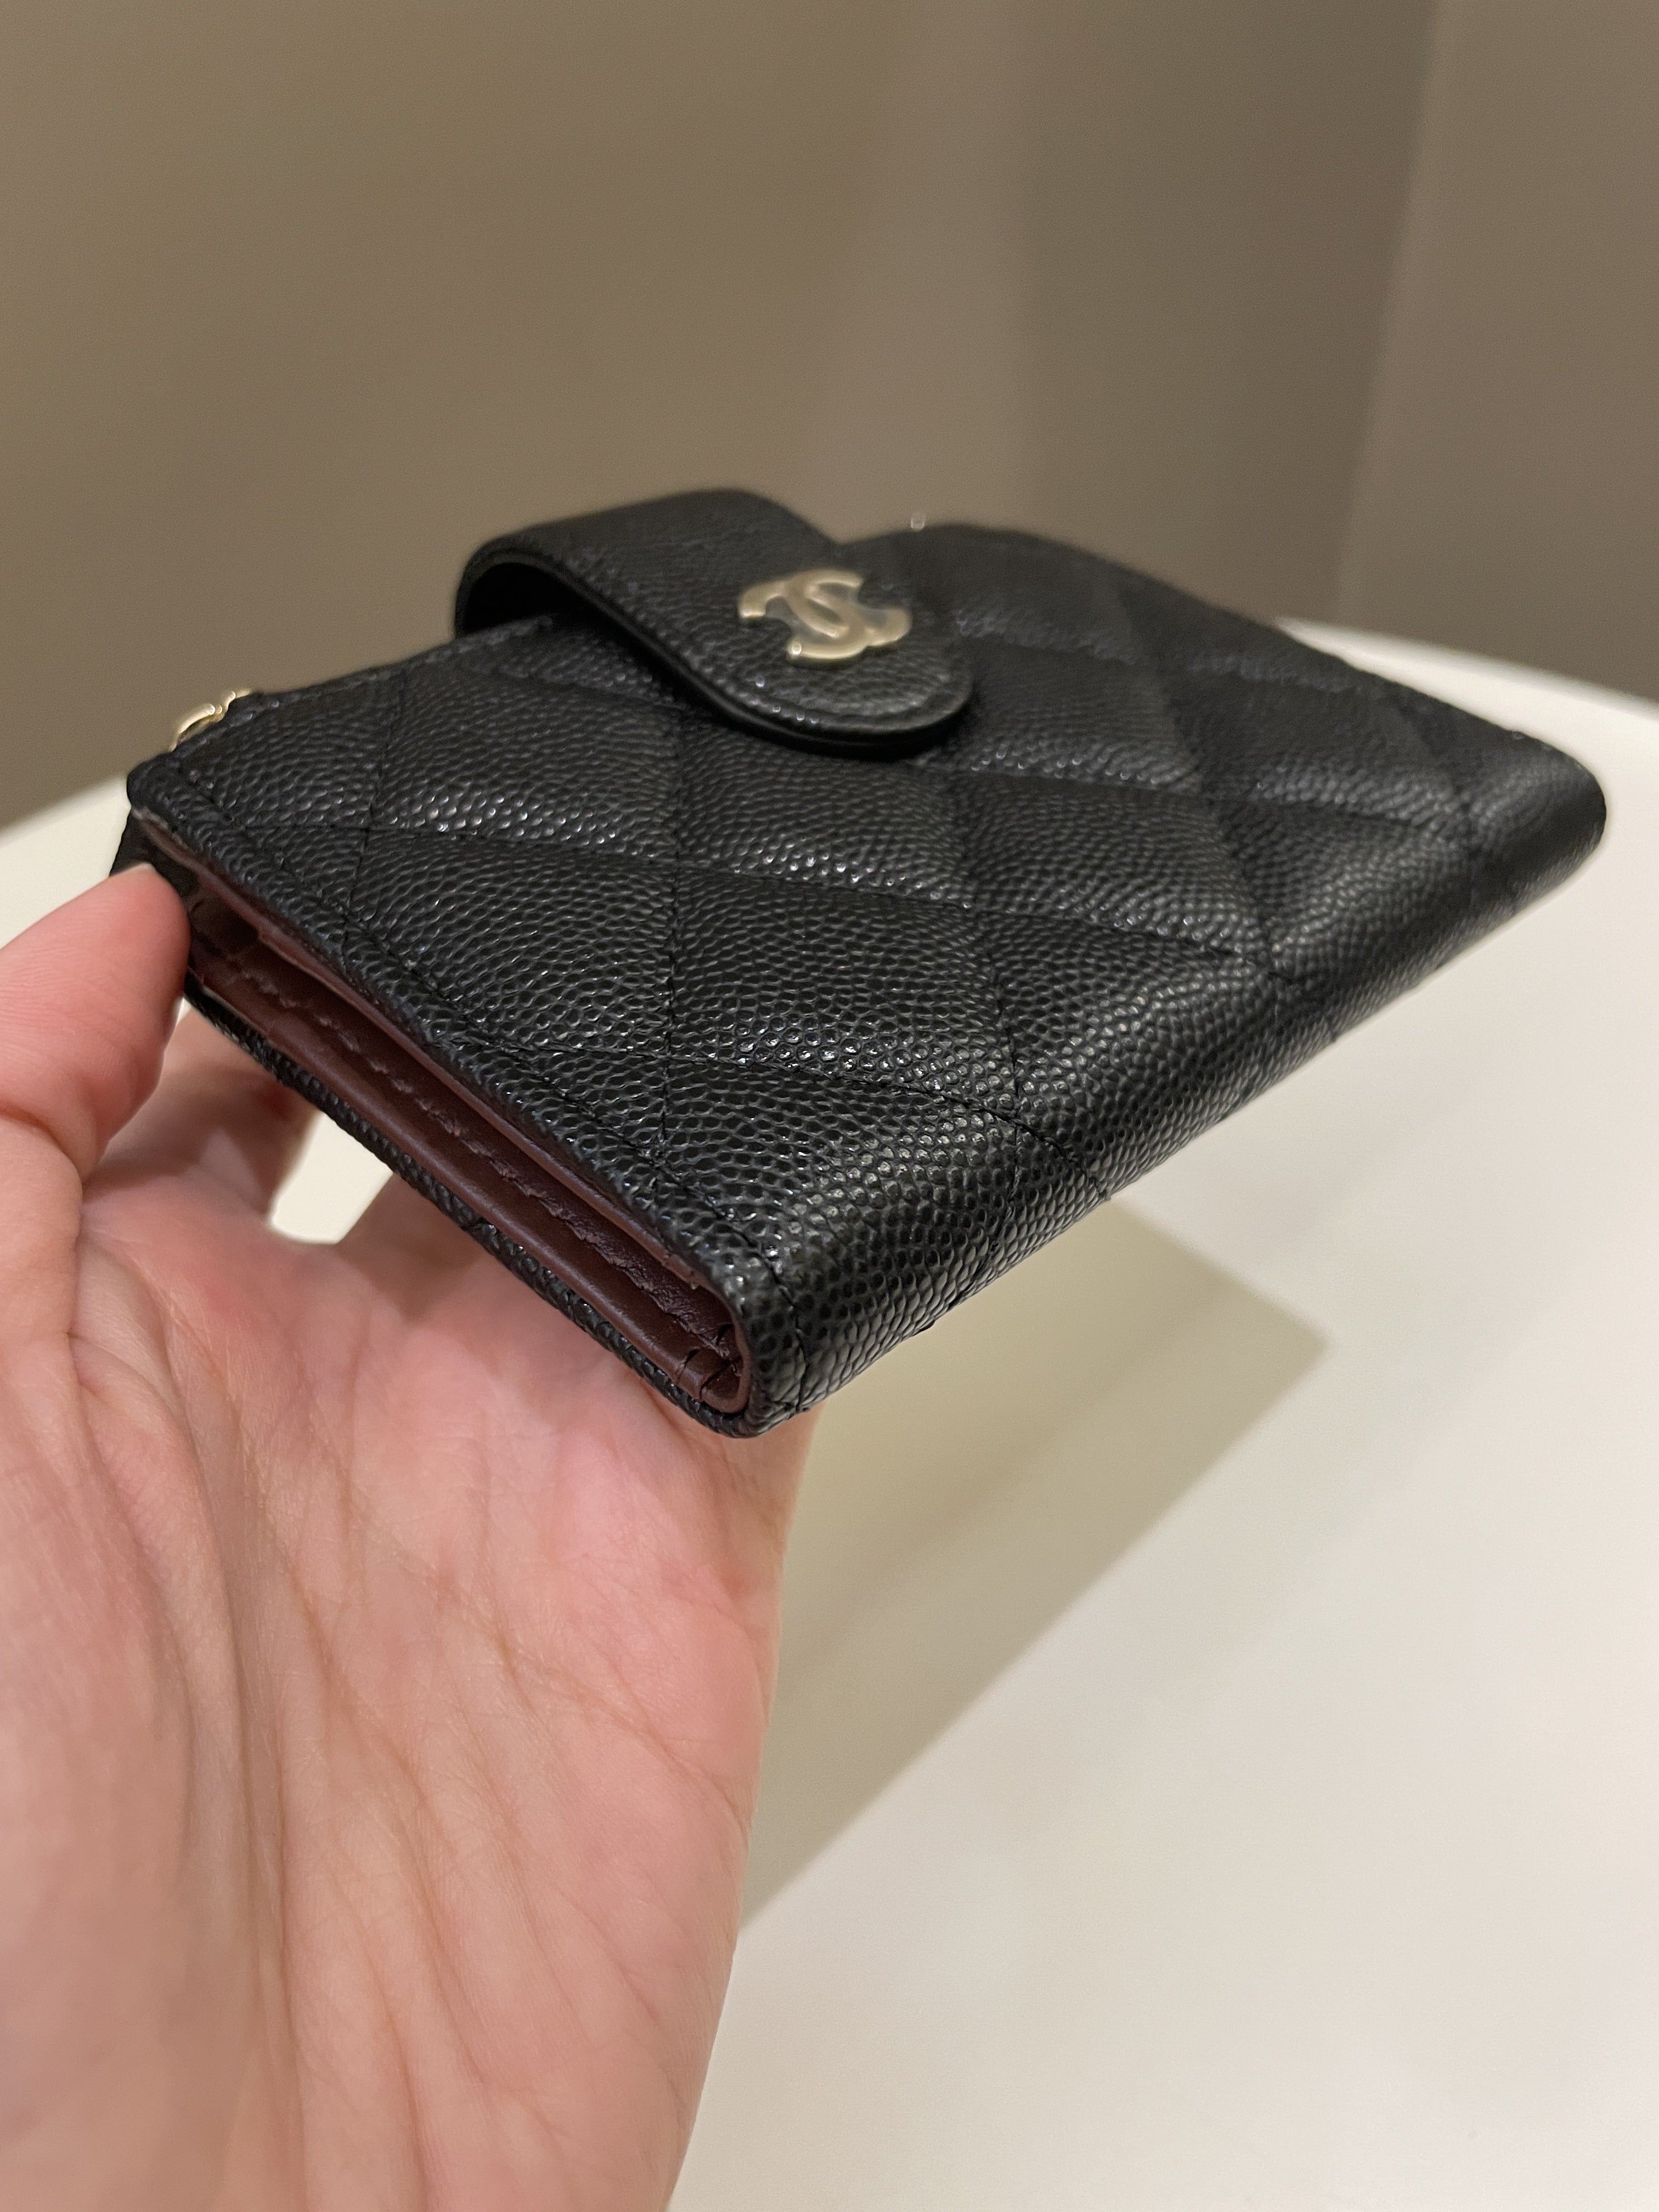 FAST DEAL $920- Chanel Black Caviar Quilted Flap Zip Card Coin Holder